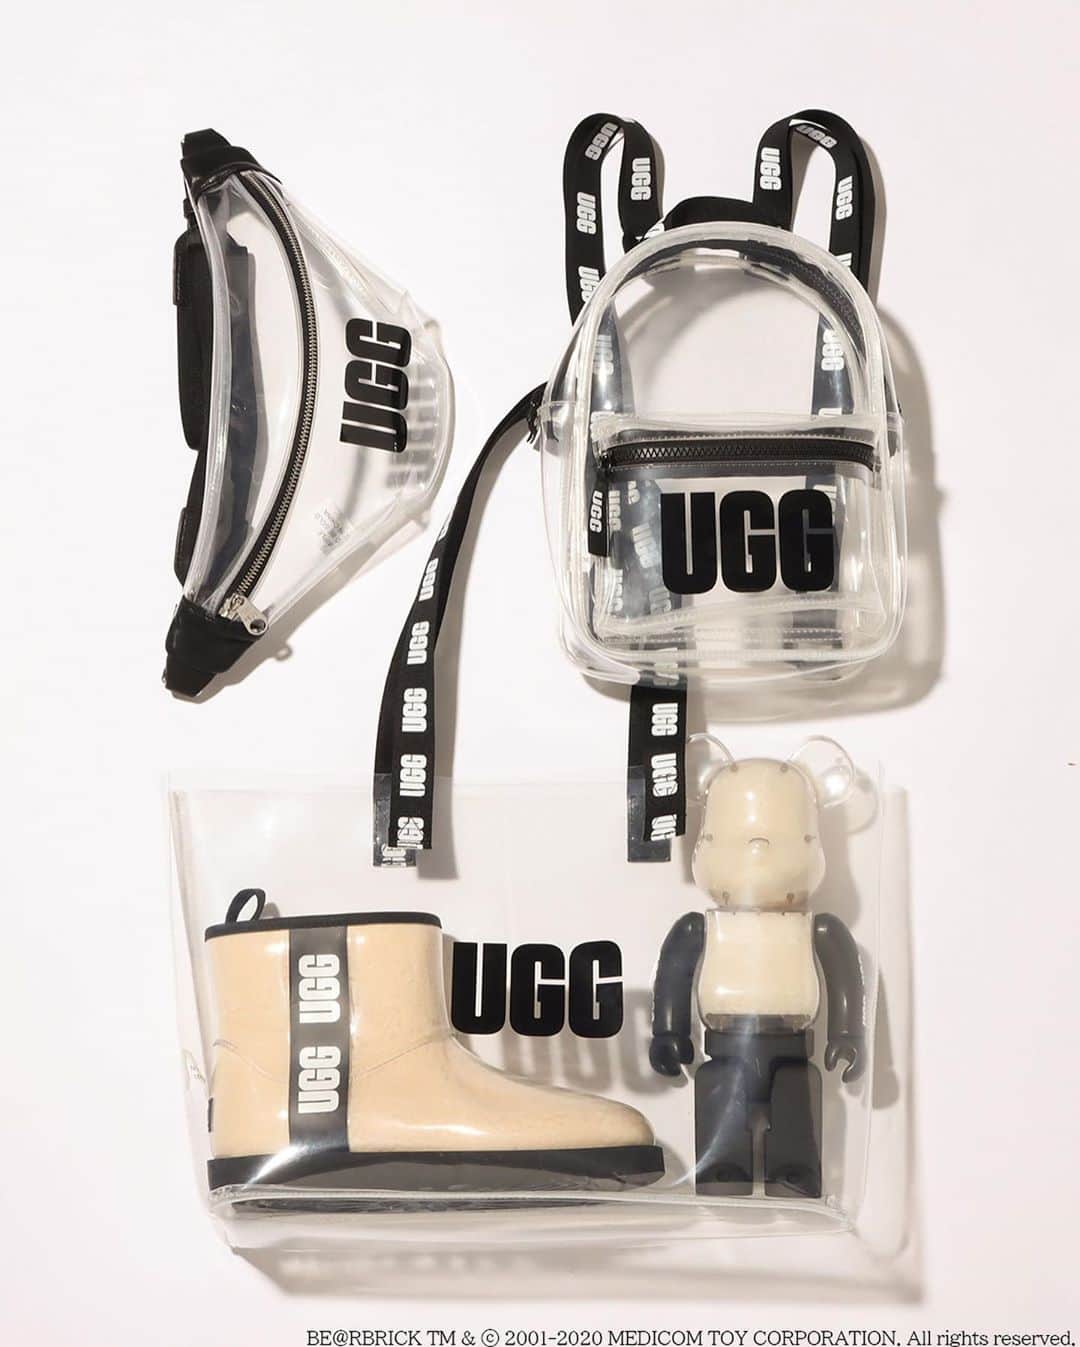 アトモスさんのインスタグラム写真 - (アトモスInstagram)「. 10/17(SAT)よりUGG®︎ Clear Collectionにフォーカスした"UGG®︎ × BE@RBRICK" 400%が登場。 10/7に発売した新作のUGG®︎ Classic Clear Miniにフックしたスペシャルデザインとなっており、クリアパーツにシープスキンを入れたトランスルーセント仕様。クリアミニの世界観を余す事なく表現し、両者の特製を活かした逸品に。 また同日10/17より同デザインのBE@RBRICK 100%をノベルティとして配布致します。是非この機会にお買い求め下さい。 ※¥15,000(税抜)以上のUGG®︎フットウェアお買い上げの方対象(アパレル、小物類は対象外)となります。 ※BE@RBRICK 400%は対象外となります。 ※限定数量となりますので配布次第終了となります。 . From 10/17 (SAT), 400% of "UGG®︎ × BE@RBRICK" focusing on UGG®︎ Clear Collection will be released. It has a special design hooked on the new UGG®︎ Classic Clear Mini released on 10/7, and is a translucent specification with sheepskin in the clear parts. A gem that fully expresses the world view of the clear mini and makes the best use of the special products of both. Also, from 10/17 on the same day, BE@RBRICK 100% with the same design will be distributed as a novelty. Please buy at this time. * Apparel and accessories are not eligible for purchases of UGG®︎ footwear over ¥ 15,000 (excluding tax).  * BE@RBRICK 400% is not applicable. * Limited quantity, so it will end as soon as it is distributed. . #atmos #atmosjapan #atmostokyo #uggatmos #ugg #medicomtoy #bearbrick #アトモス #アグ #アグアトモス」10月12日 20時21分 - atmos_japan